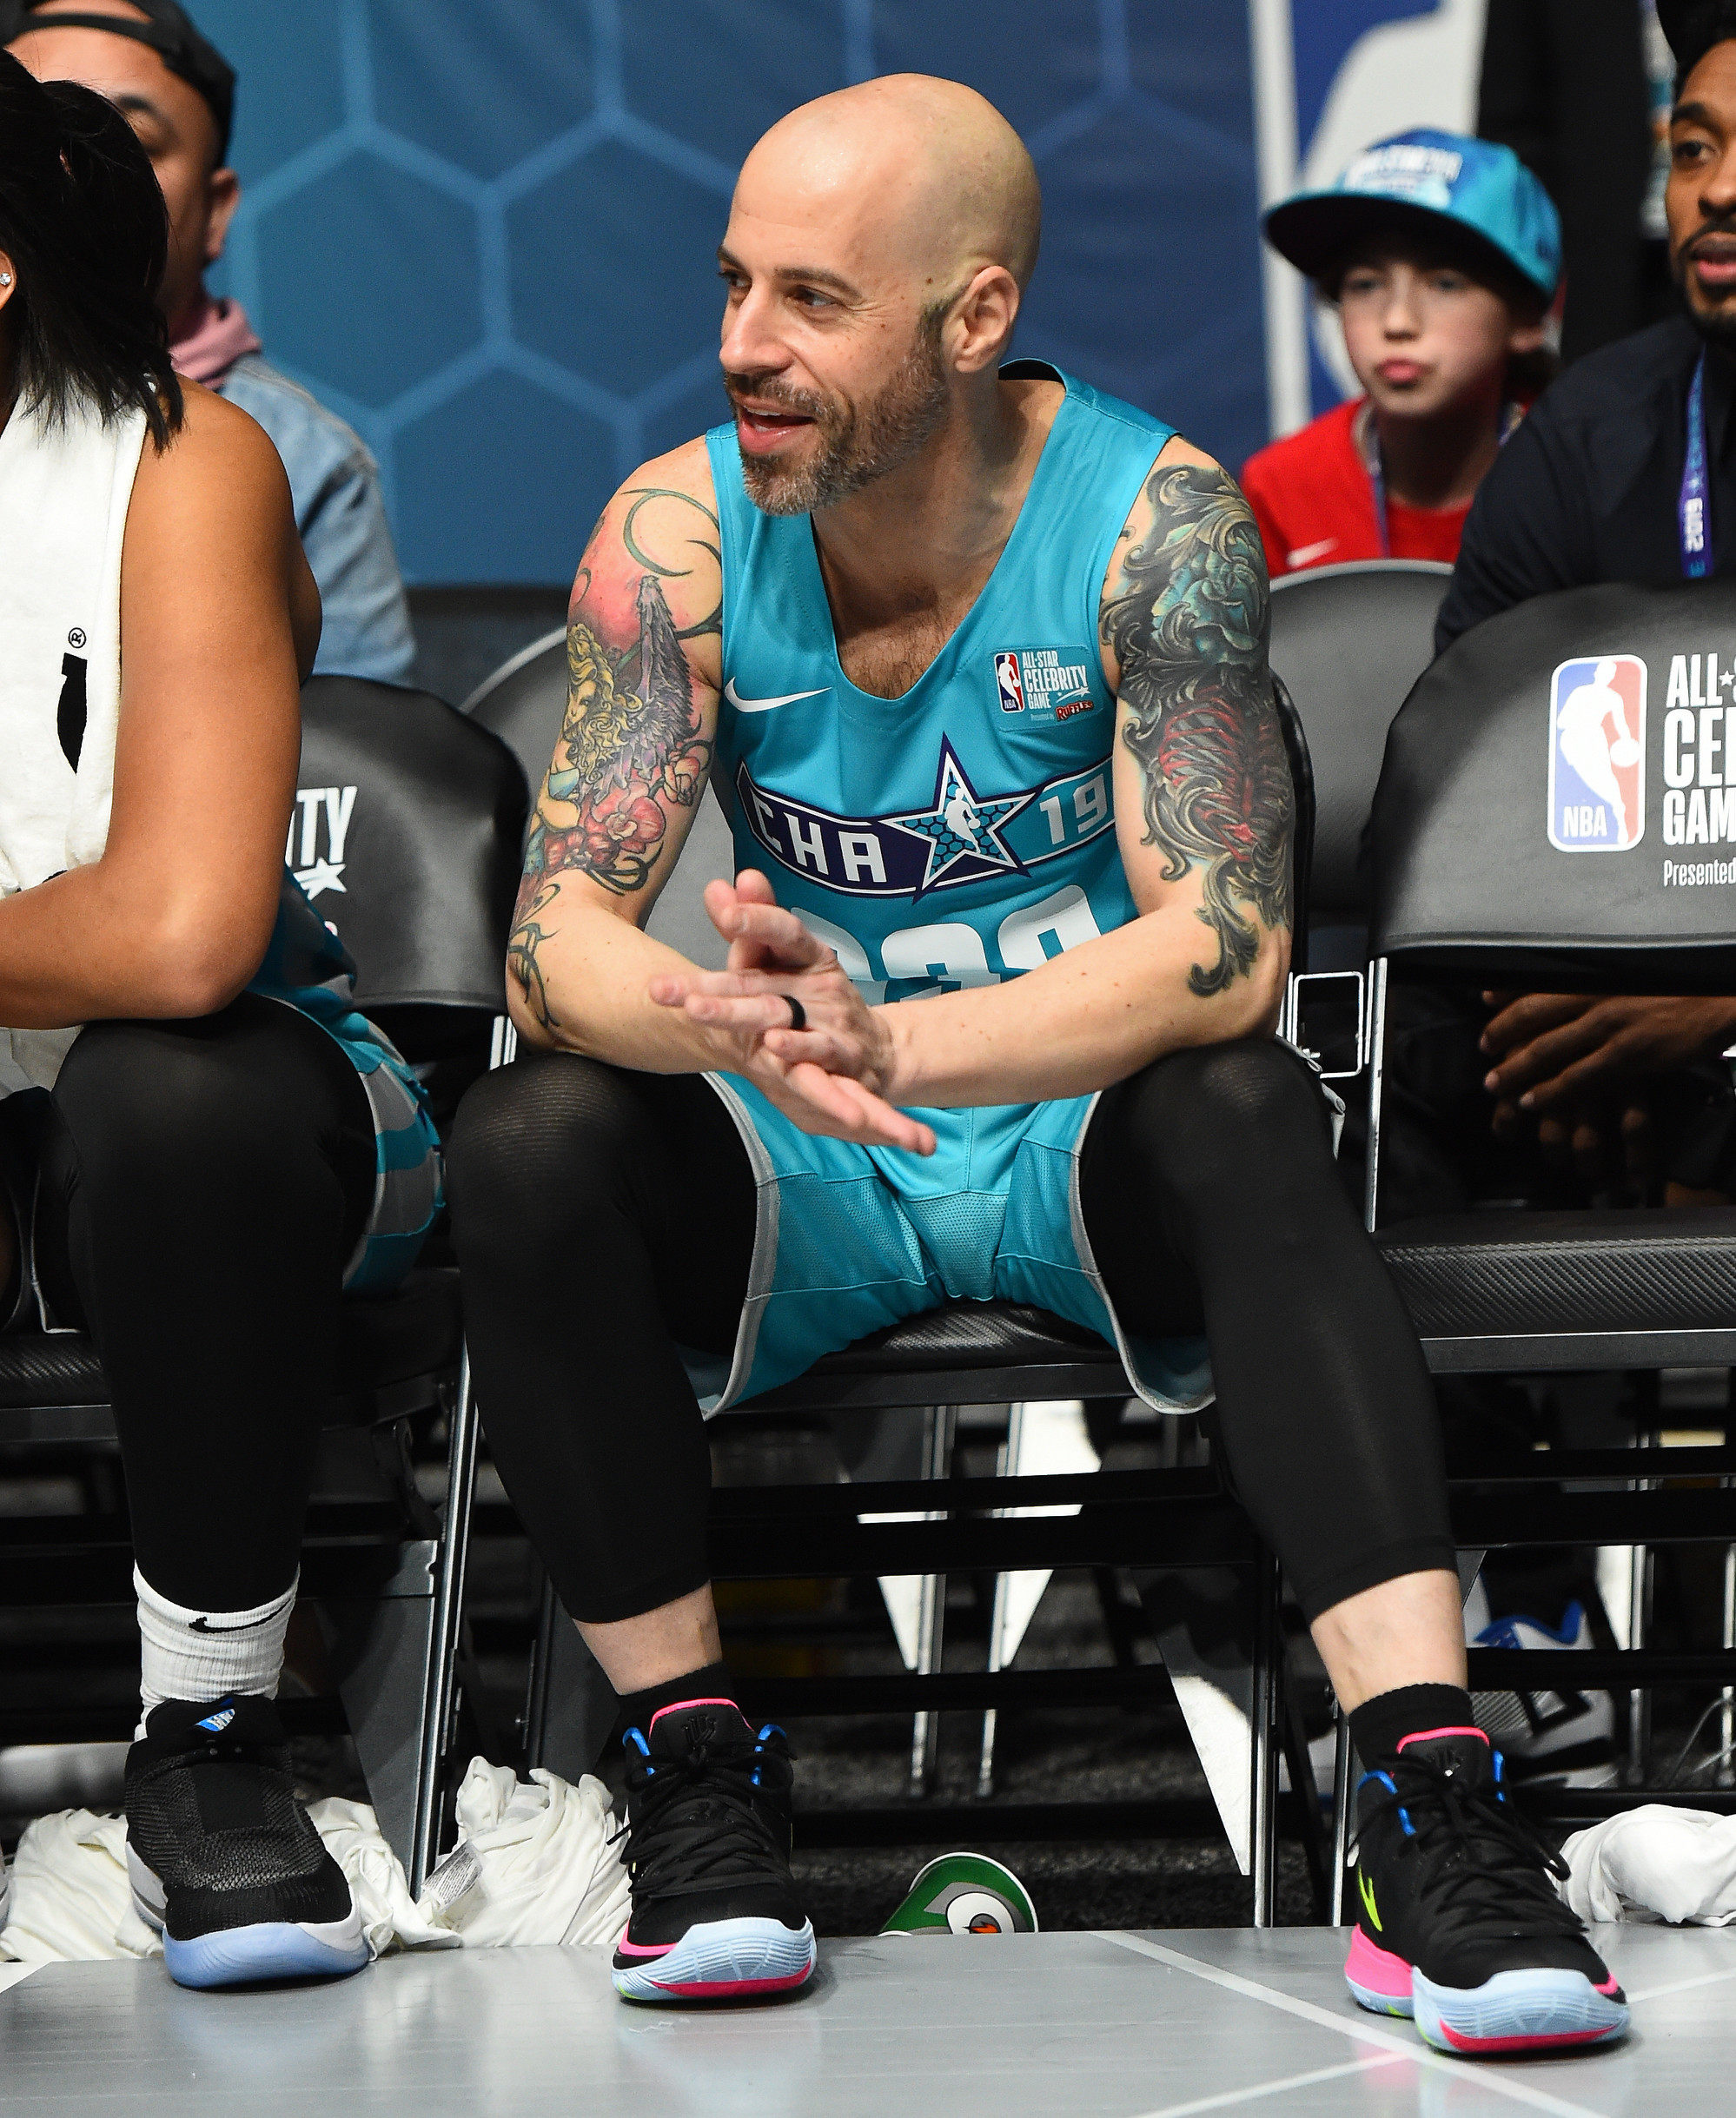 Bad Bunny plays in the 2019 NBA All-Star Celebrity Game at Bojangles  News Photo - Getty Images